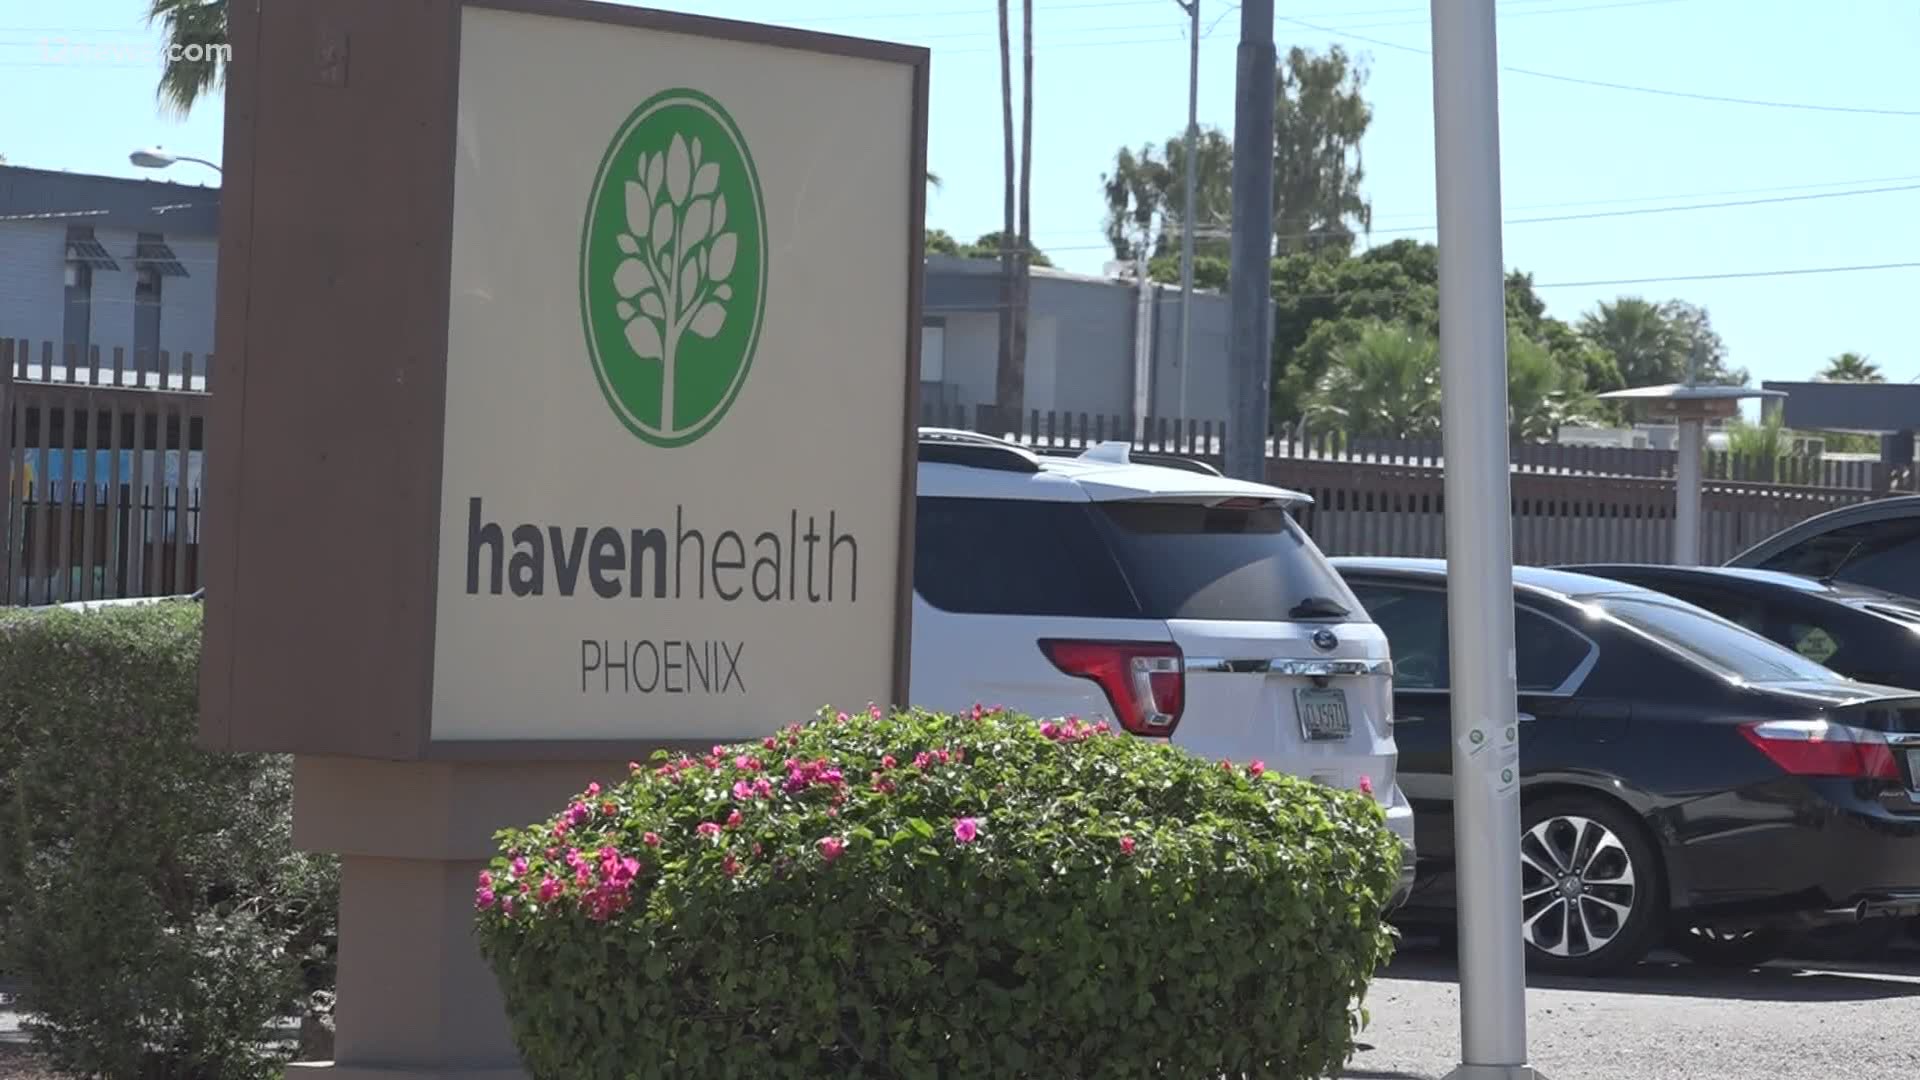 Desert Cove Nursing Center in Chandler has 53 confirmed cases of COVID-19. Have of Phoenix workers worry conditions are safe at their facility.